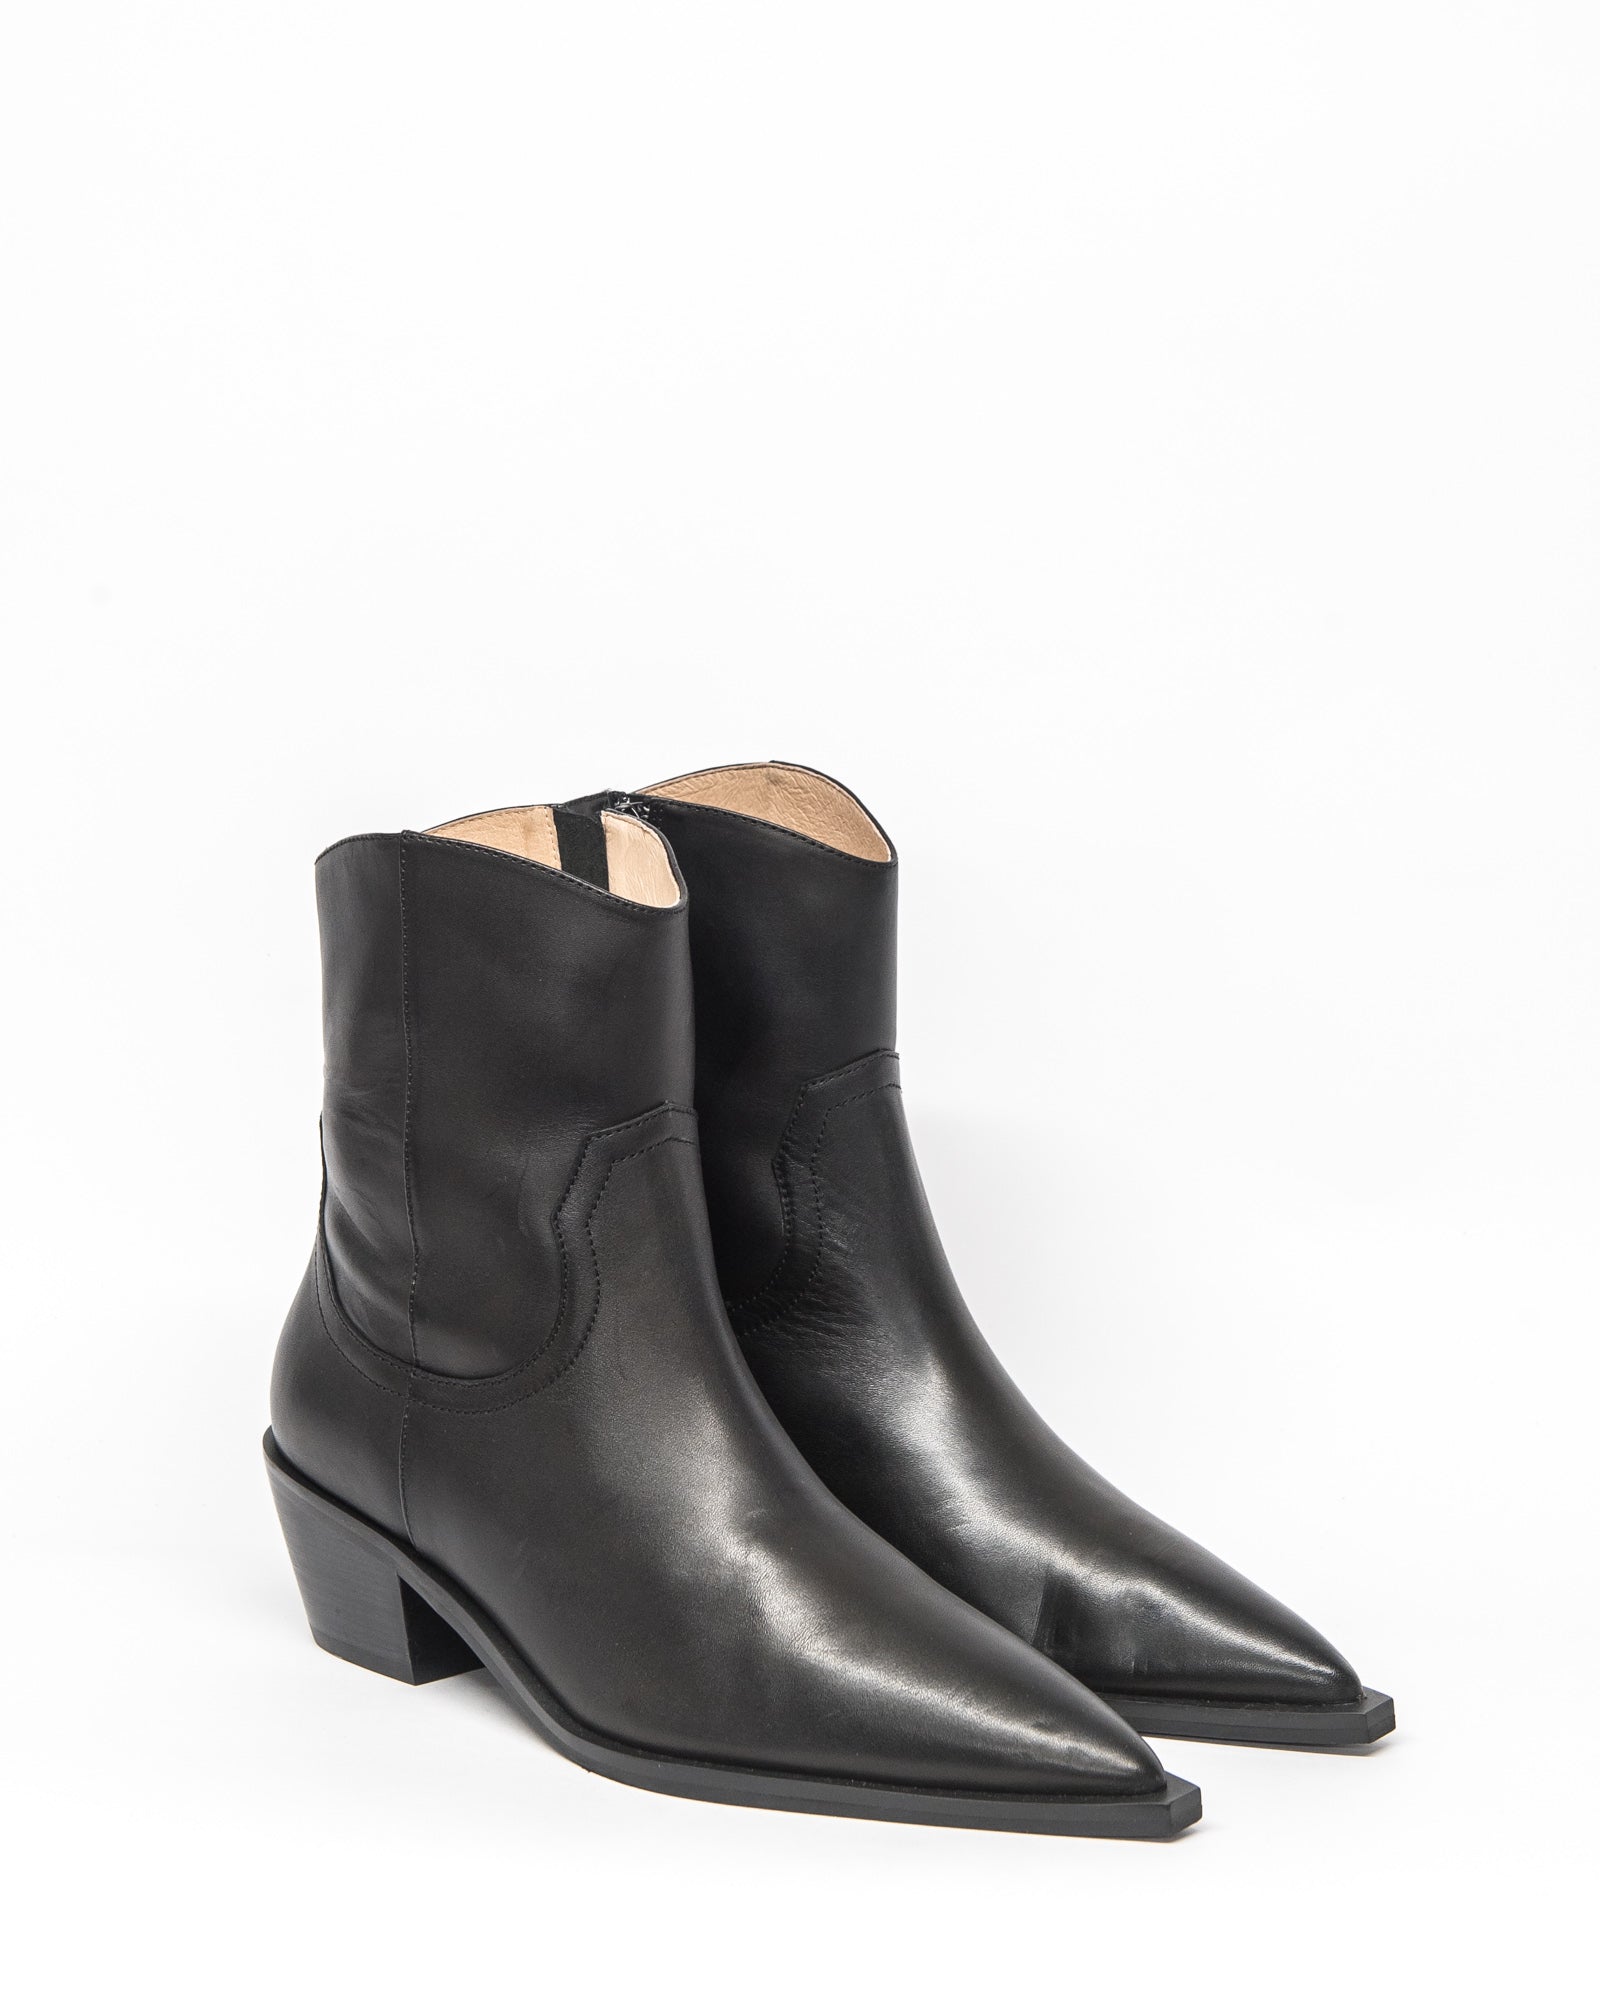 whip boot - black leather